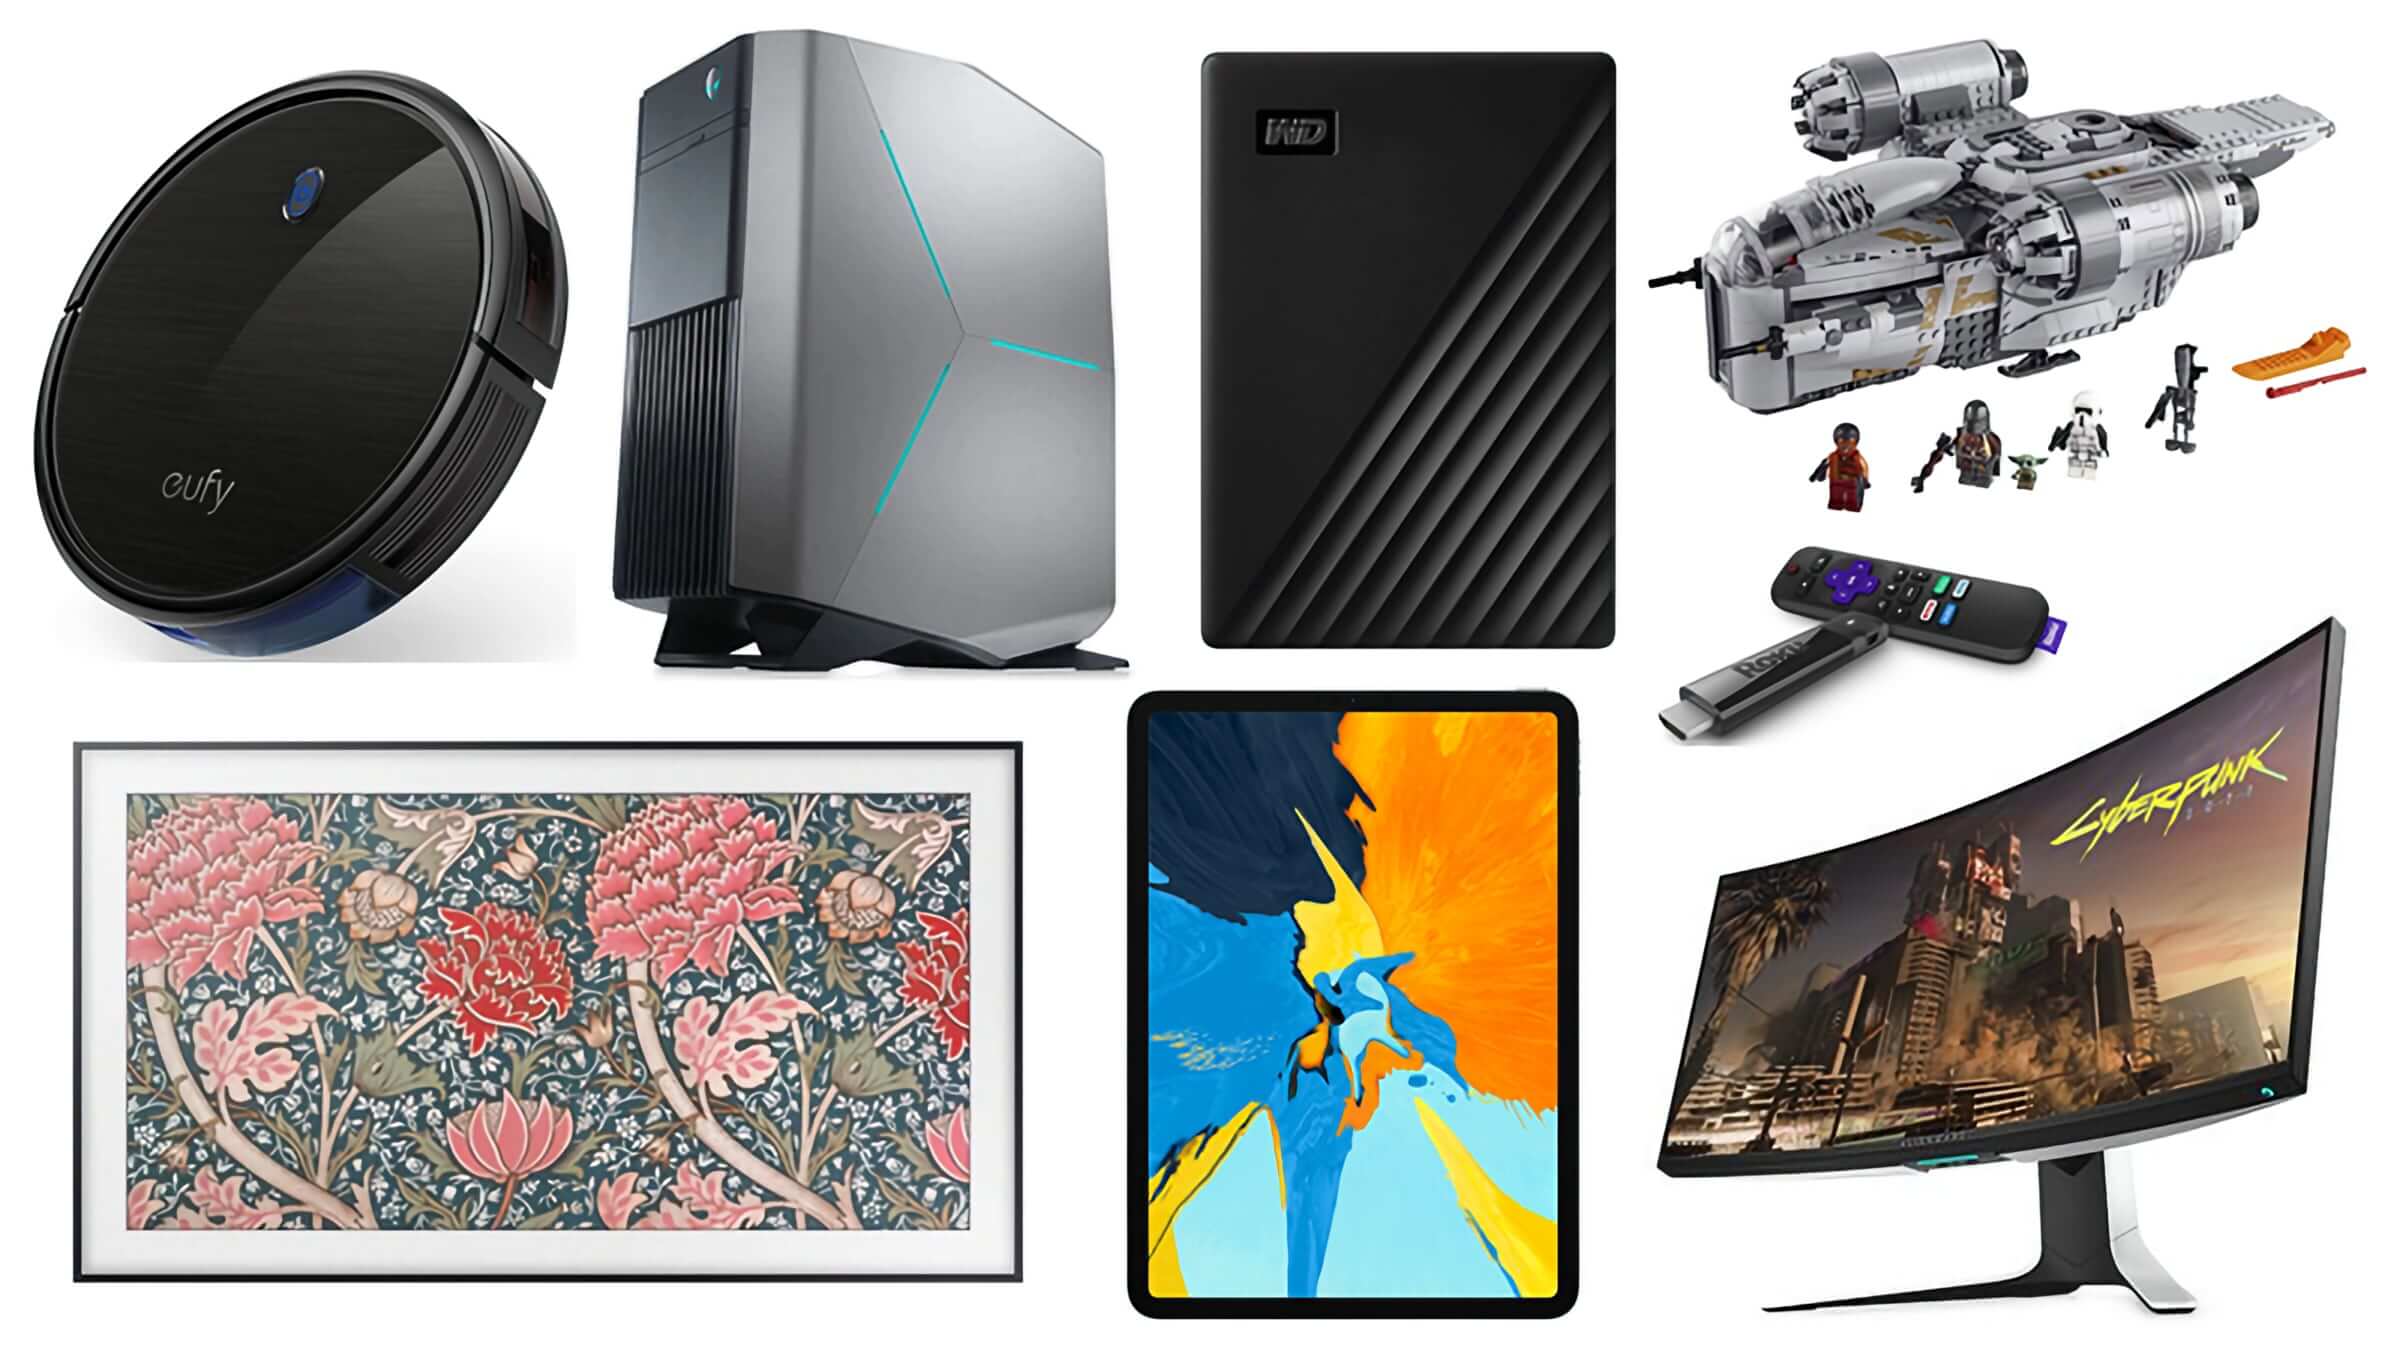 Get an extra 17% off Dell and Alienware PCs this weekend, and more tech deals